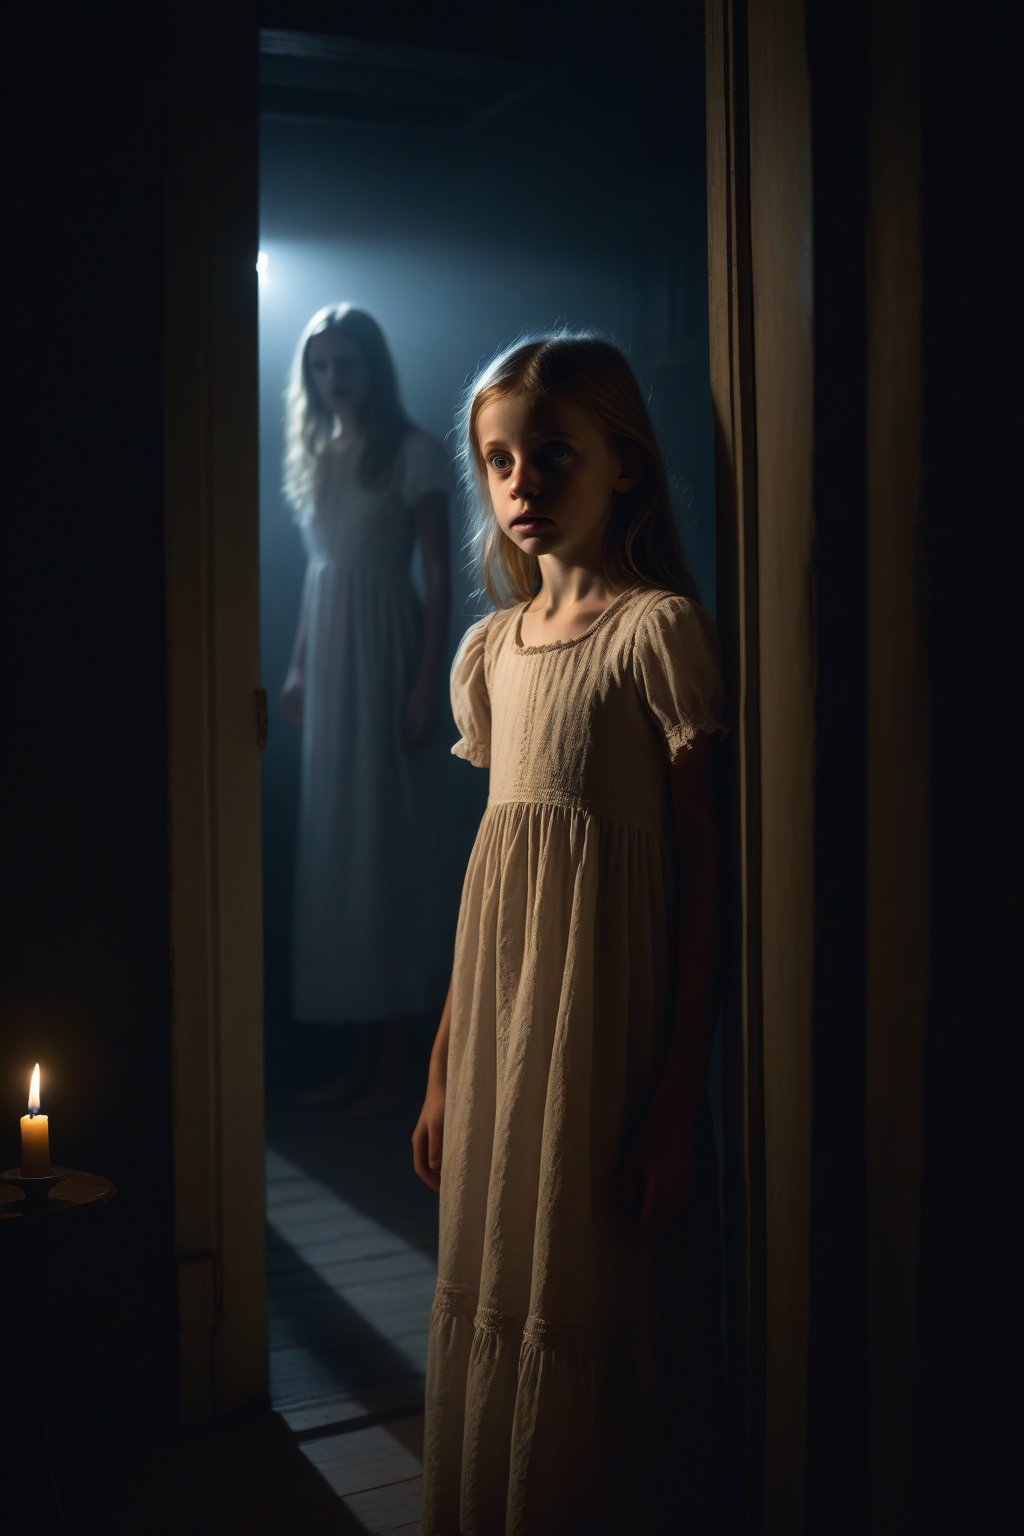 A photo realistic and haunting scene unfolds: a lone scared, young girl stands in the dark, eerie atmosphere of a darkened haunted house on a foggy night. Her tanslucent nightdress reveals her vulnerability amidst the shadows. The flickering candles cast an otherworldly glow, illuminating her terrified expression as she gazes terrified out the window, her cute features twisted in fear.score_9, score_8_up